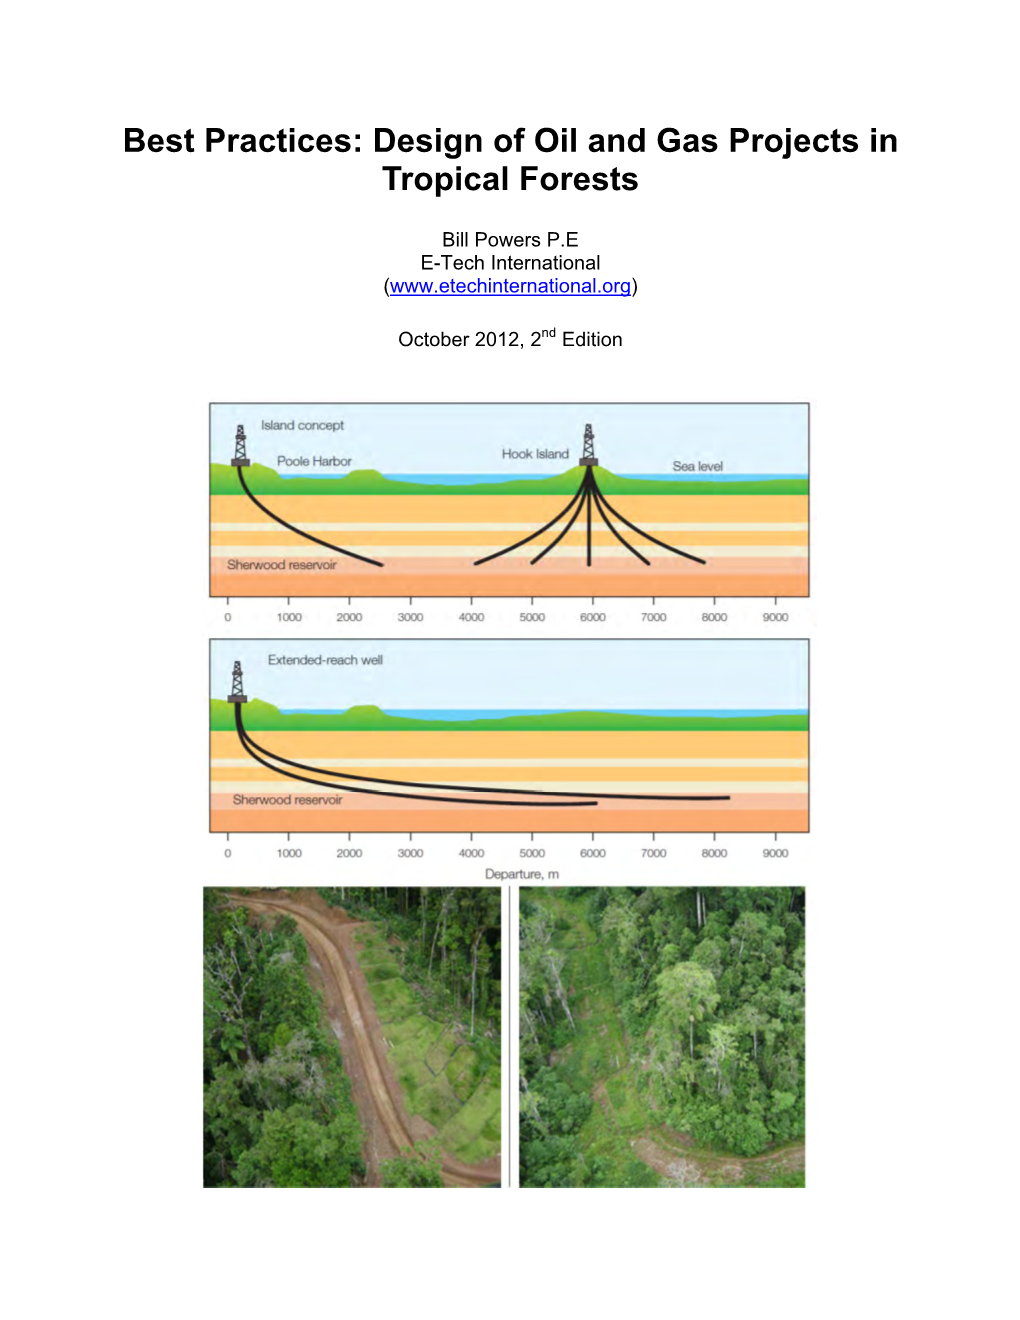 Best Practices: Design of Oil and Gas Projects in Tropical Forests